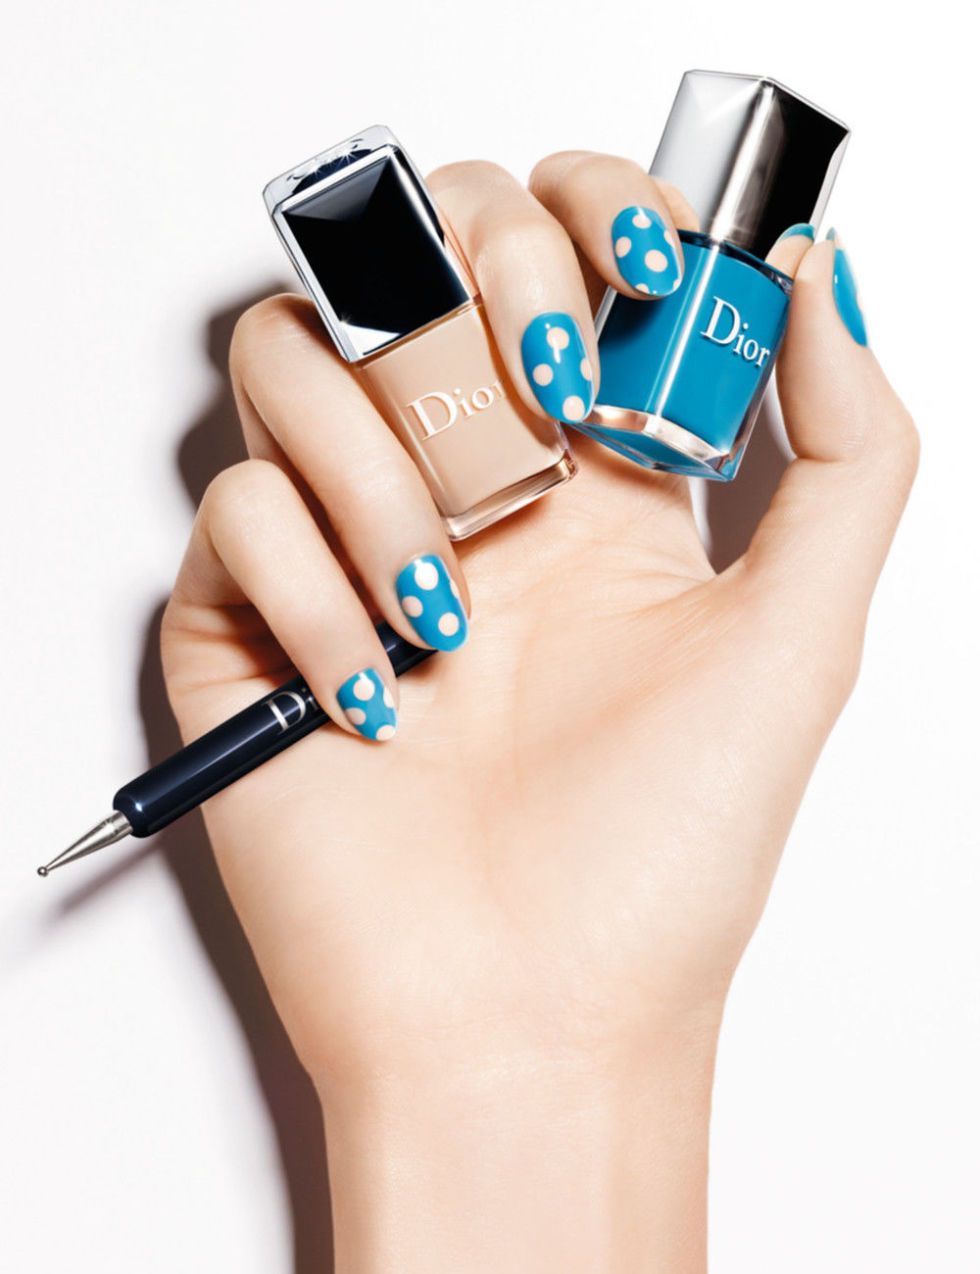 Blue, Finger, Product, Skin, Style, Nail, Teal, Aqua, Gadget, Electric blue, 